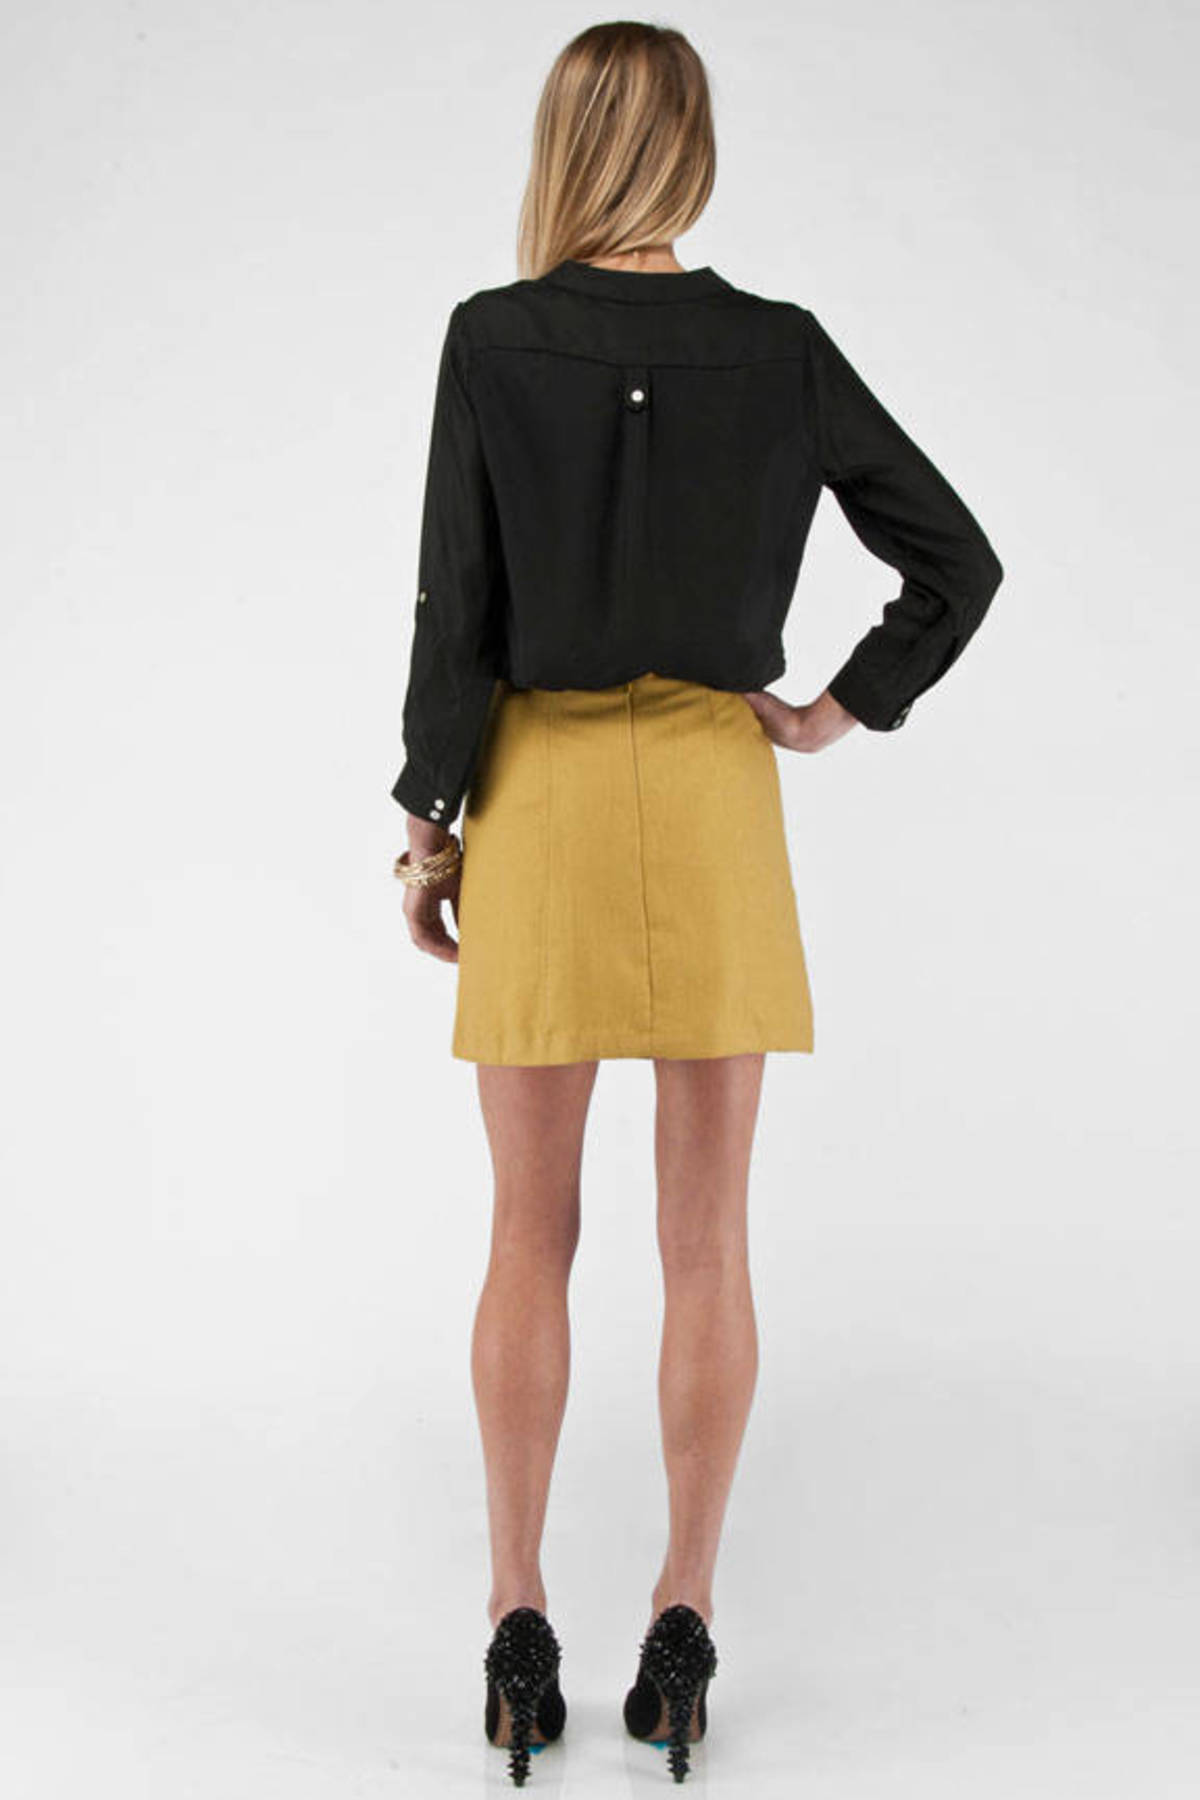 The Other Skirt in Mustard - $14 | Tobi US